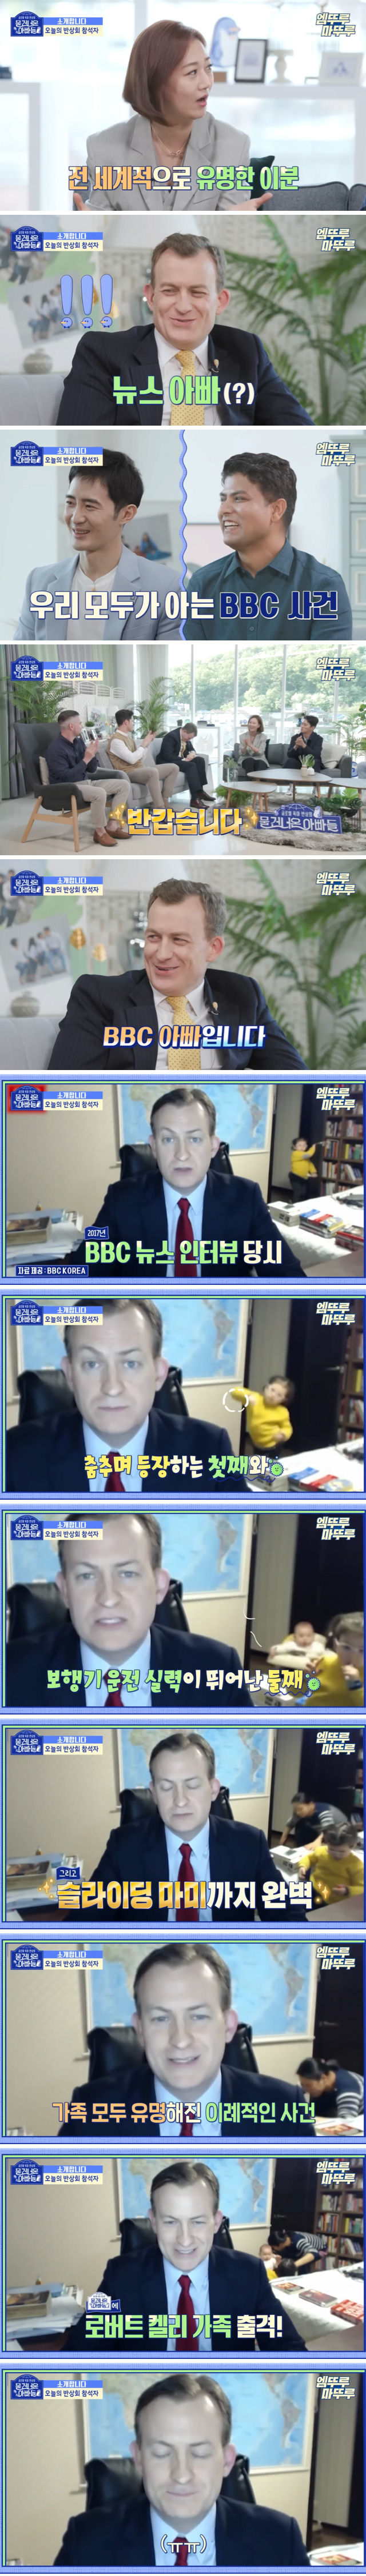 Korean Babies Became Famous on BBC